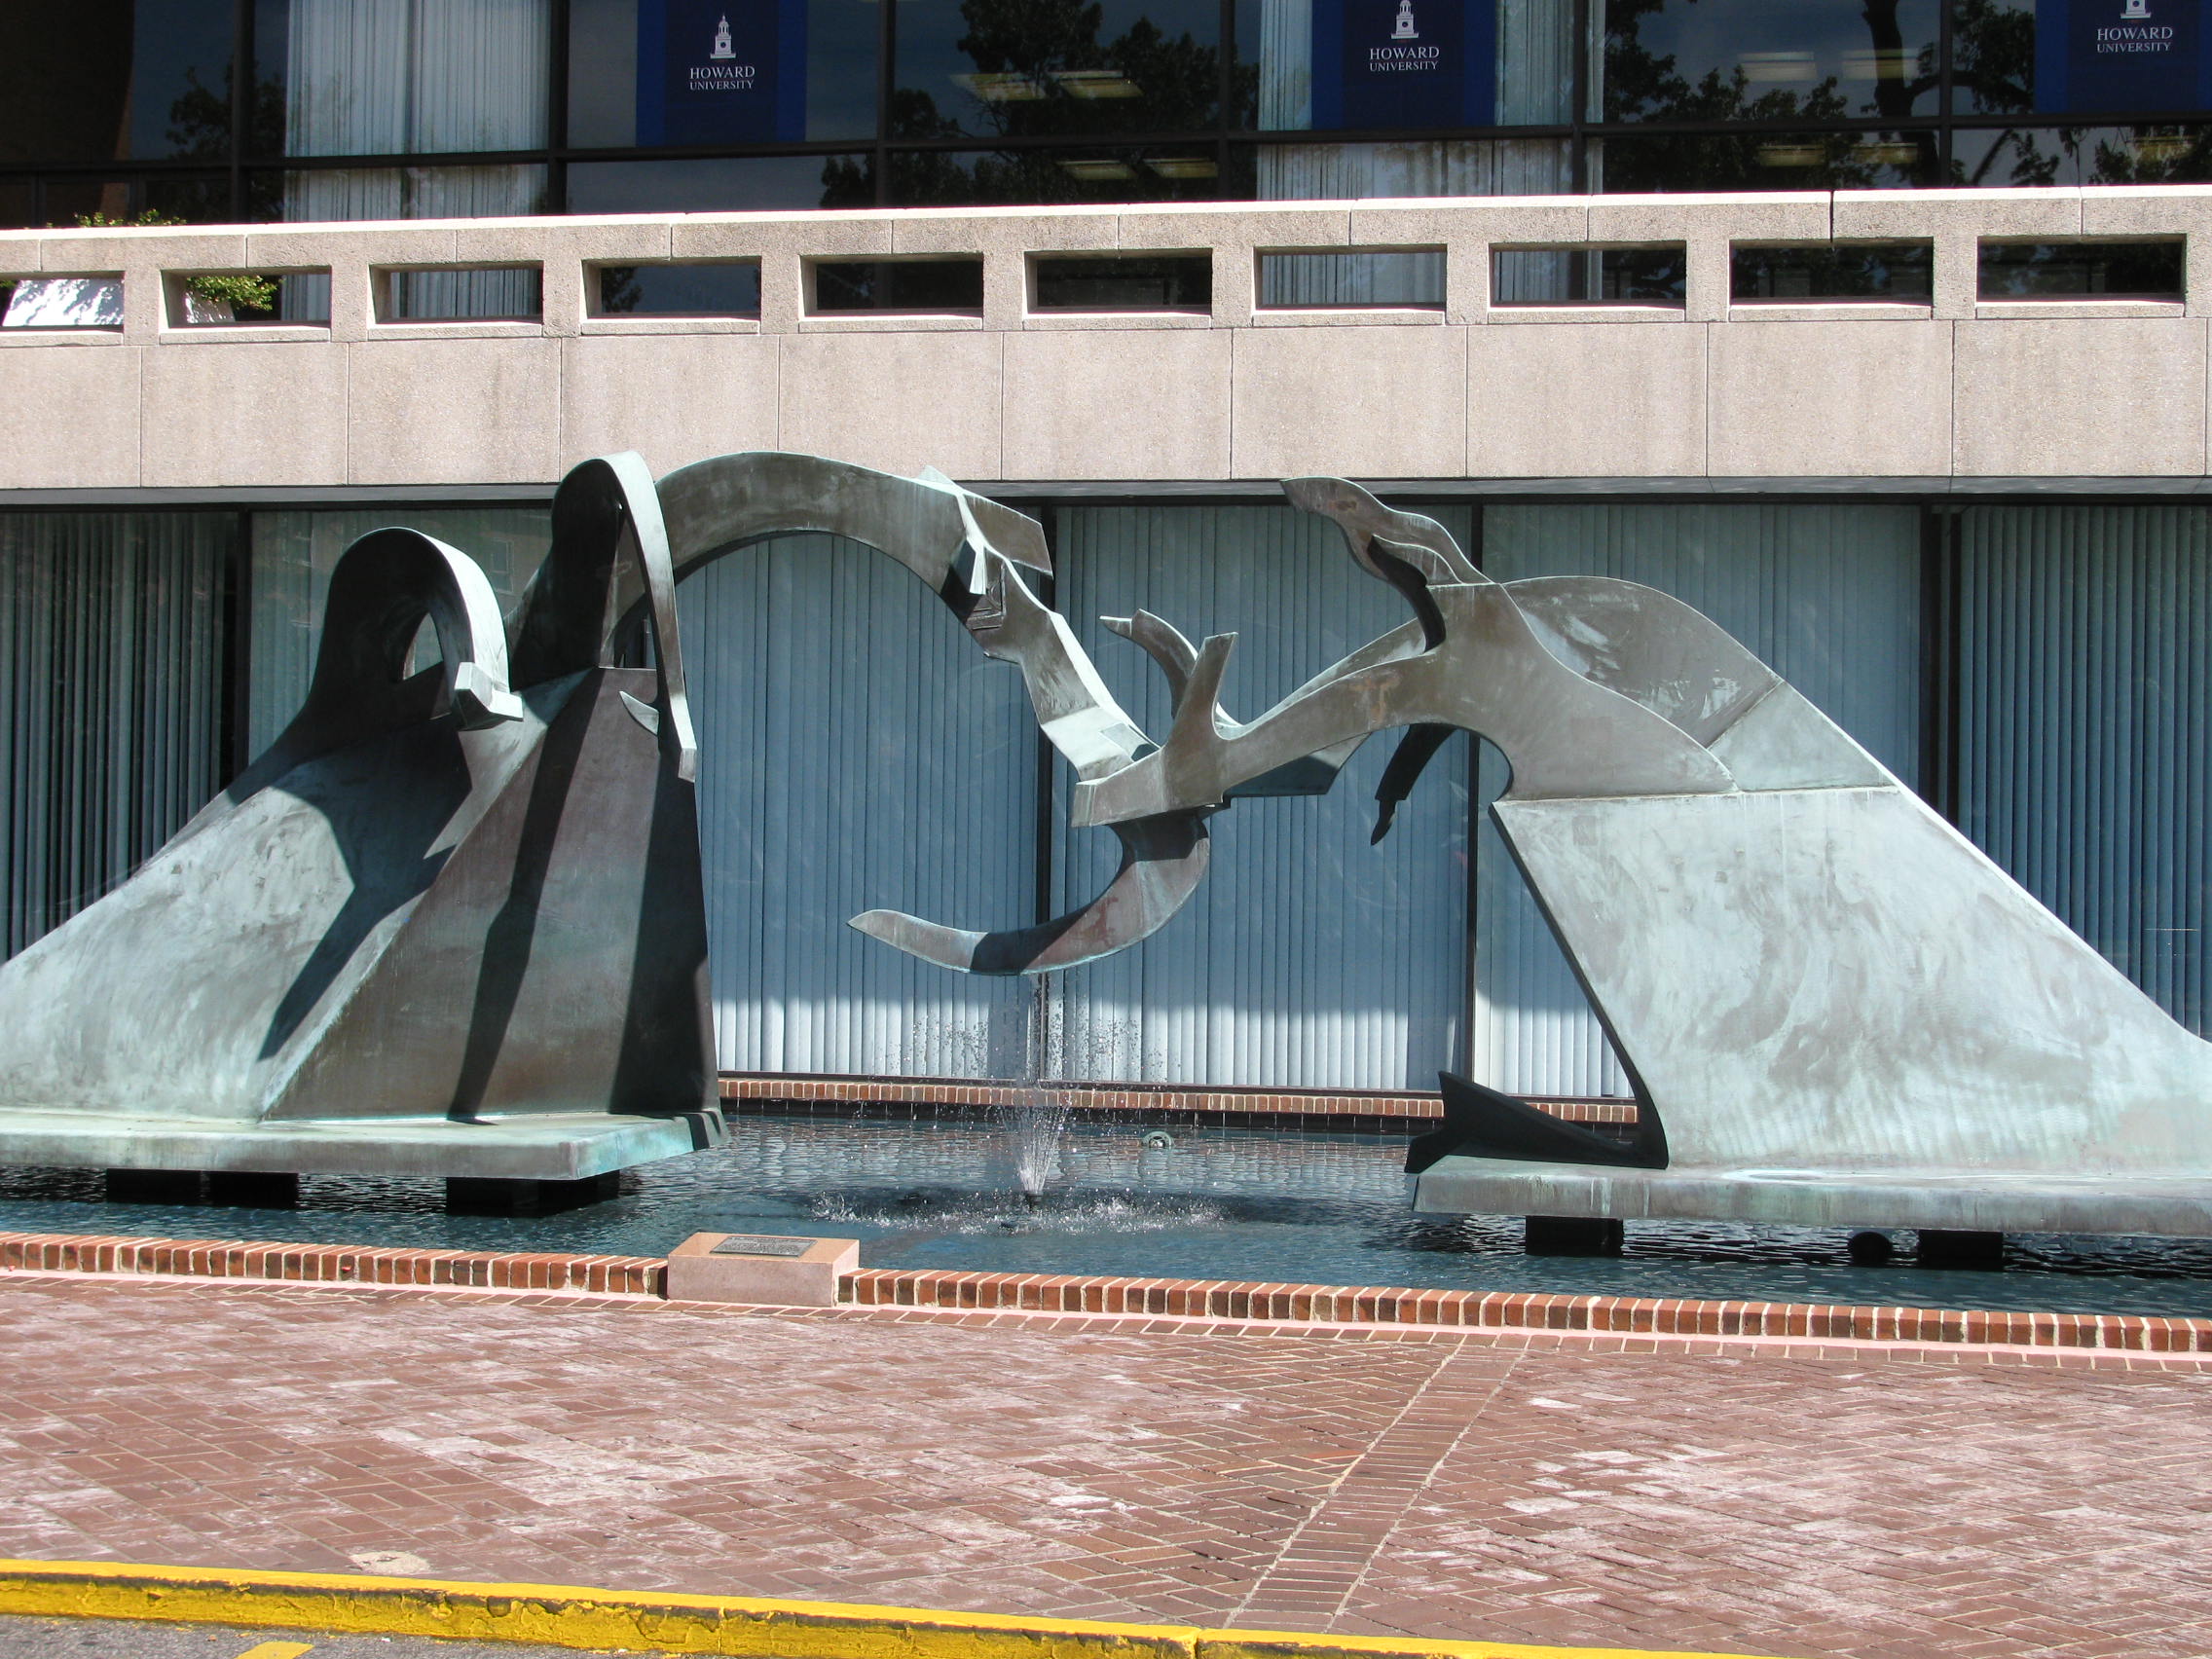 A metalic sculpture sits outside over a rectangual water fountain in front of office windows. The sculpture rises up and interlocks between the left side and right side in abstract shapes.